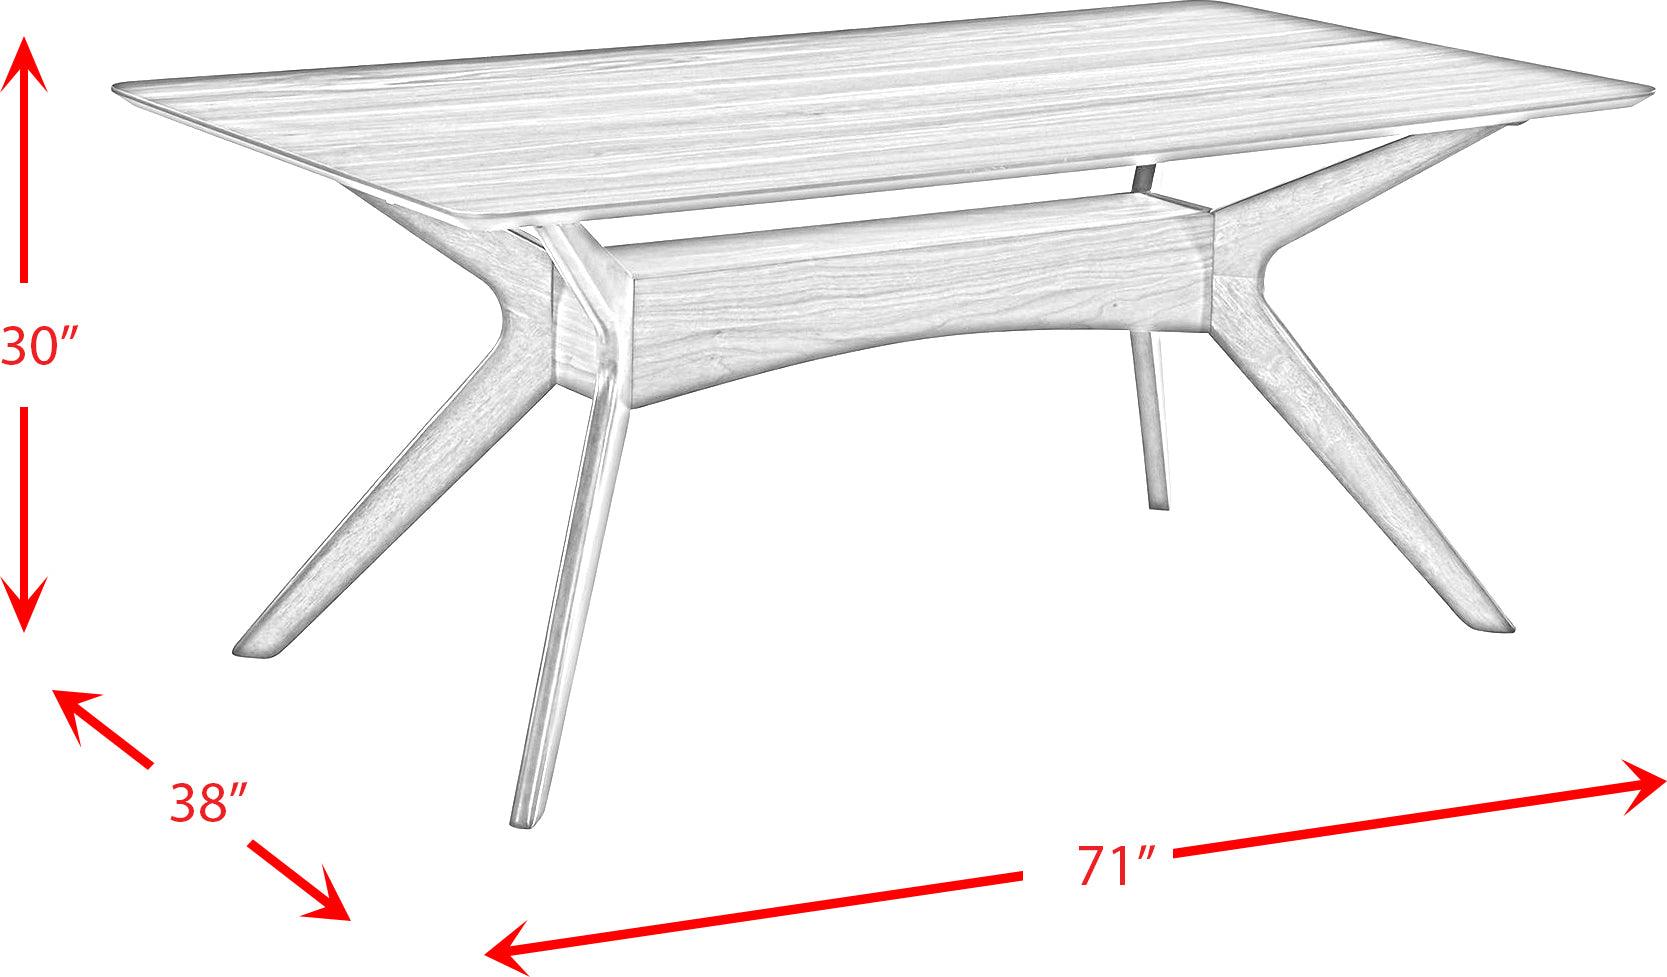 Elements Dining Tables - Ronan Standard Height Rectangle Dining Table